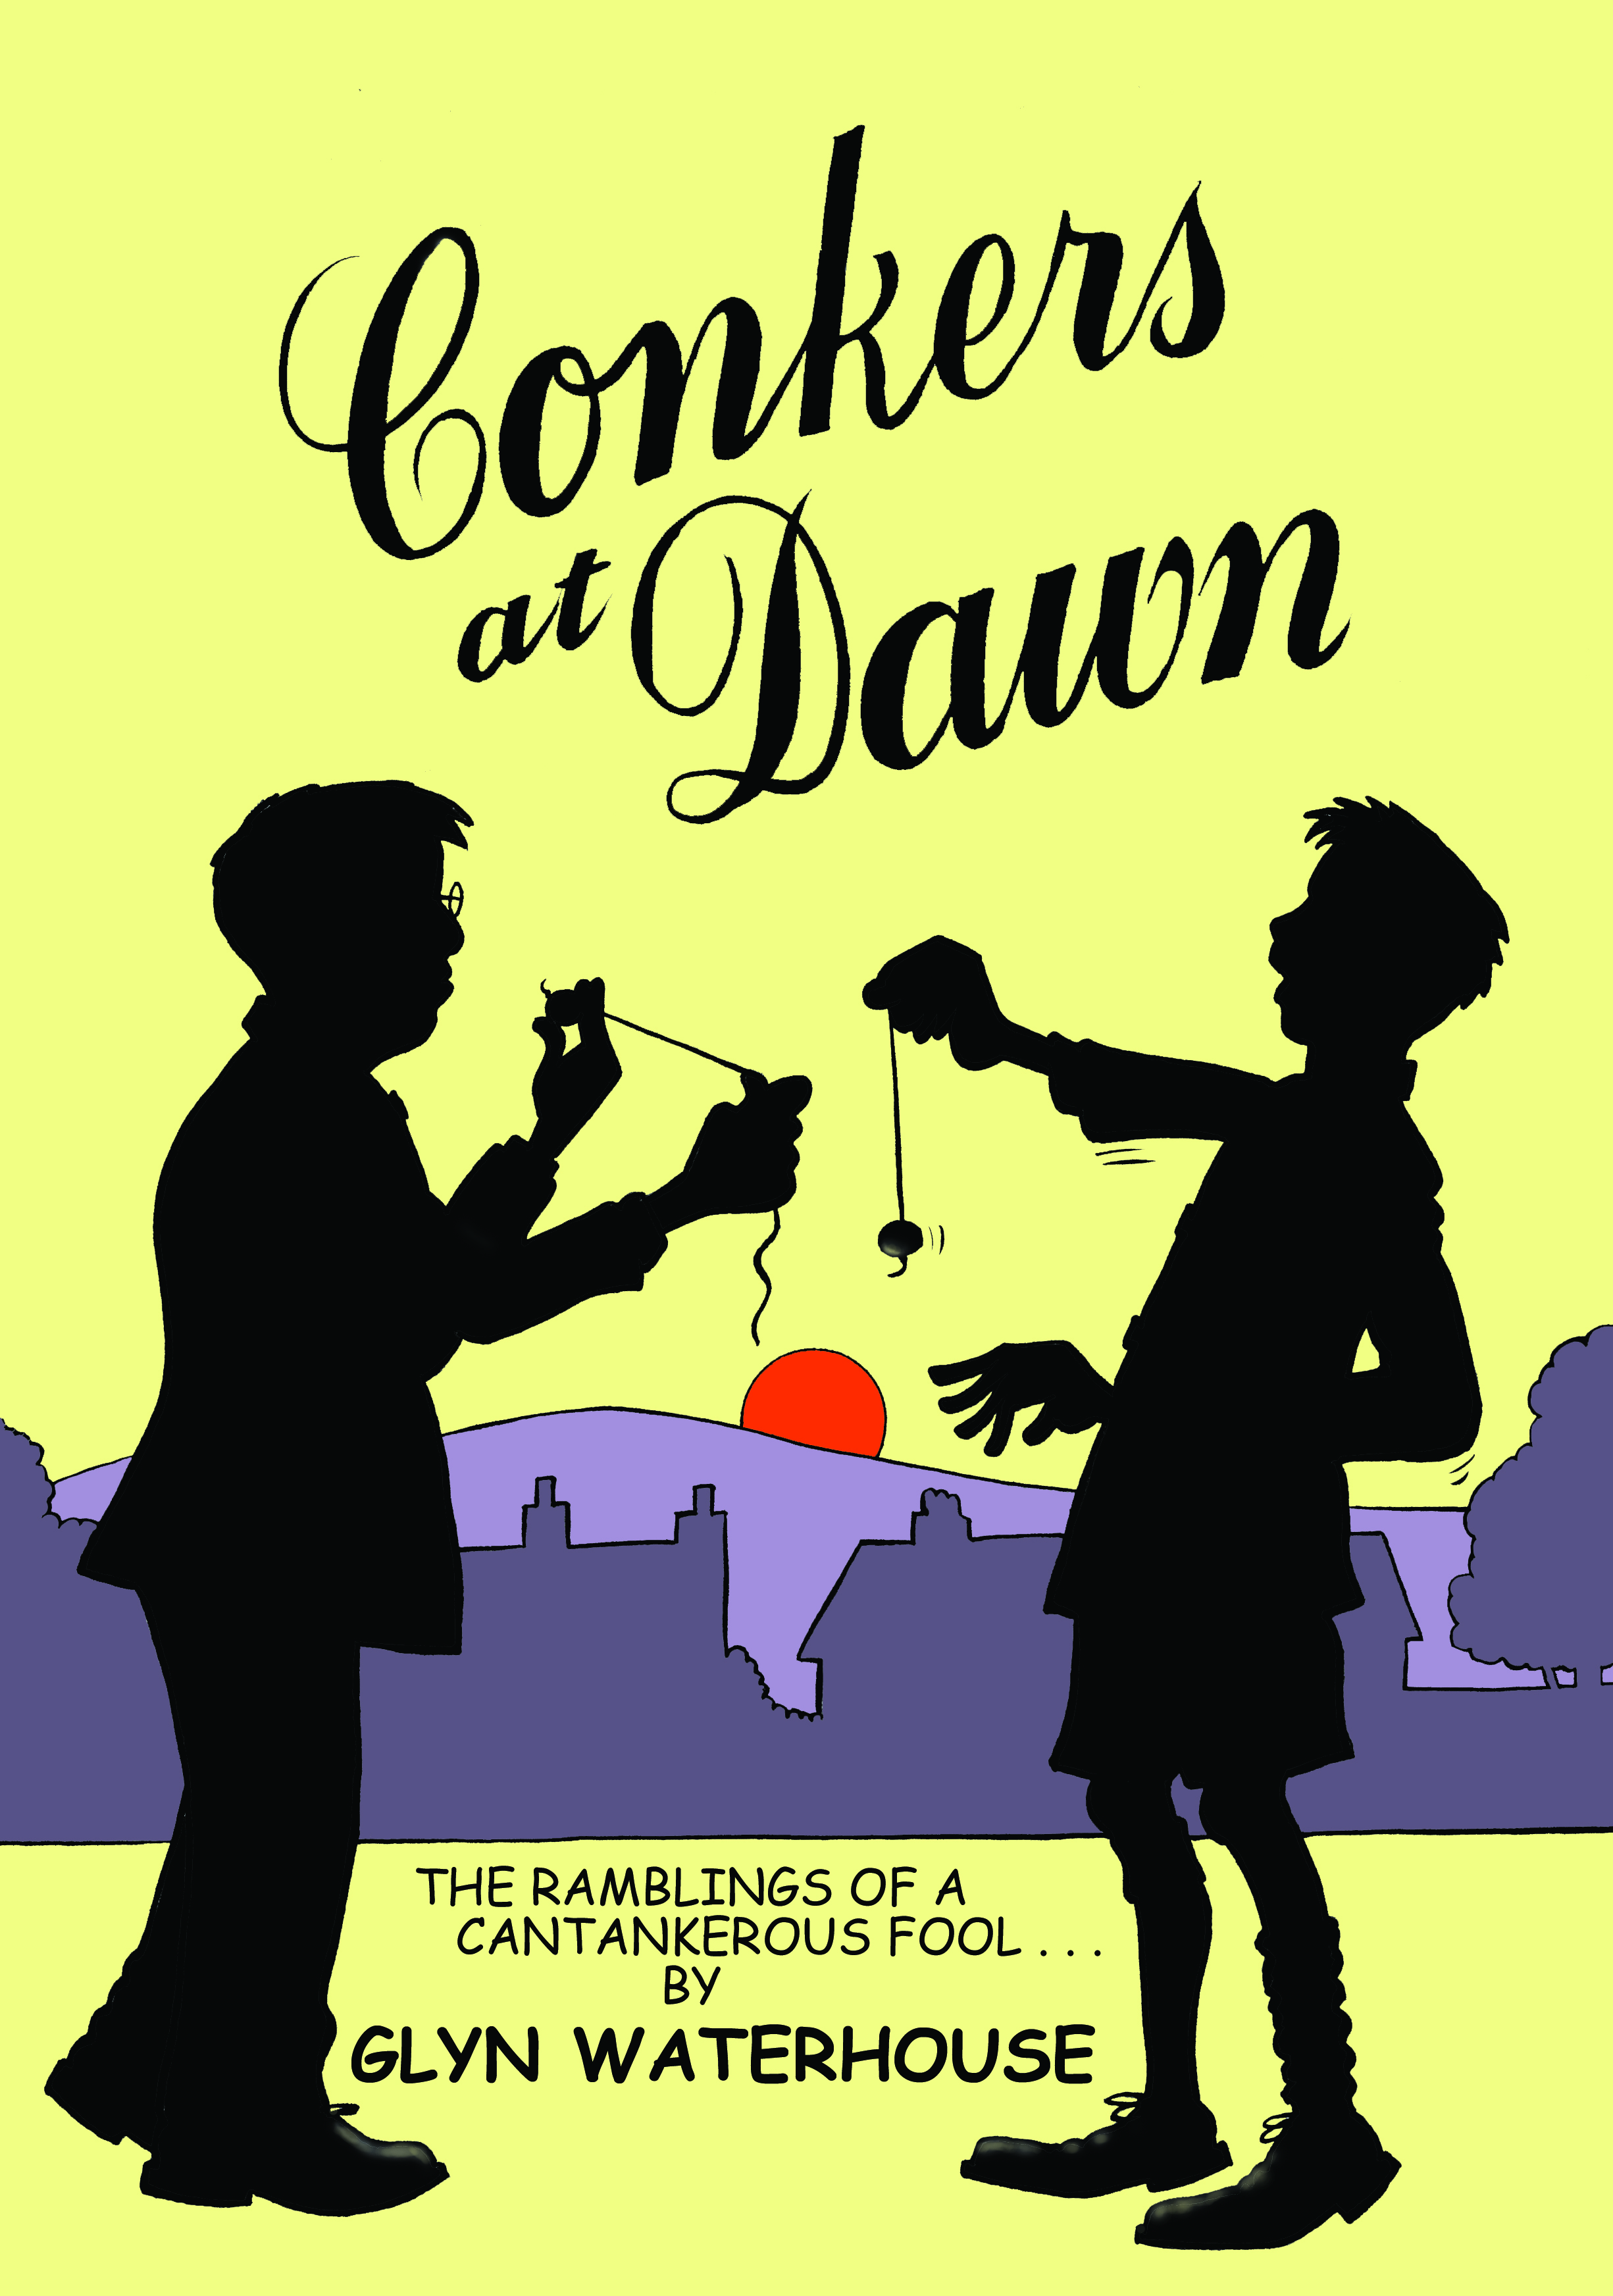 Conkers at Dawn cover illustration